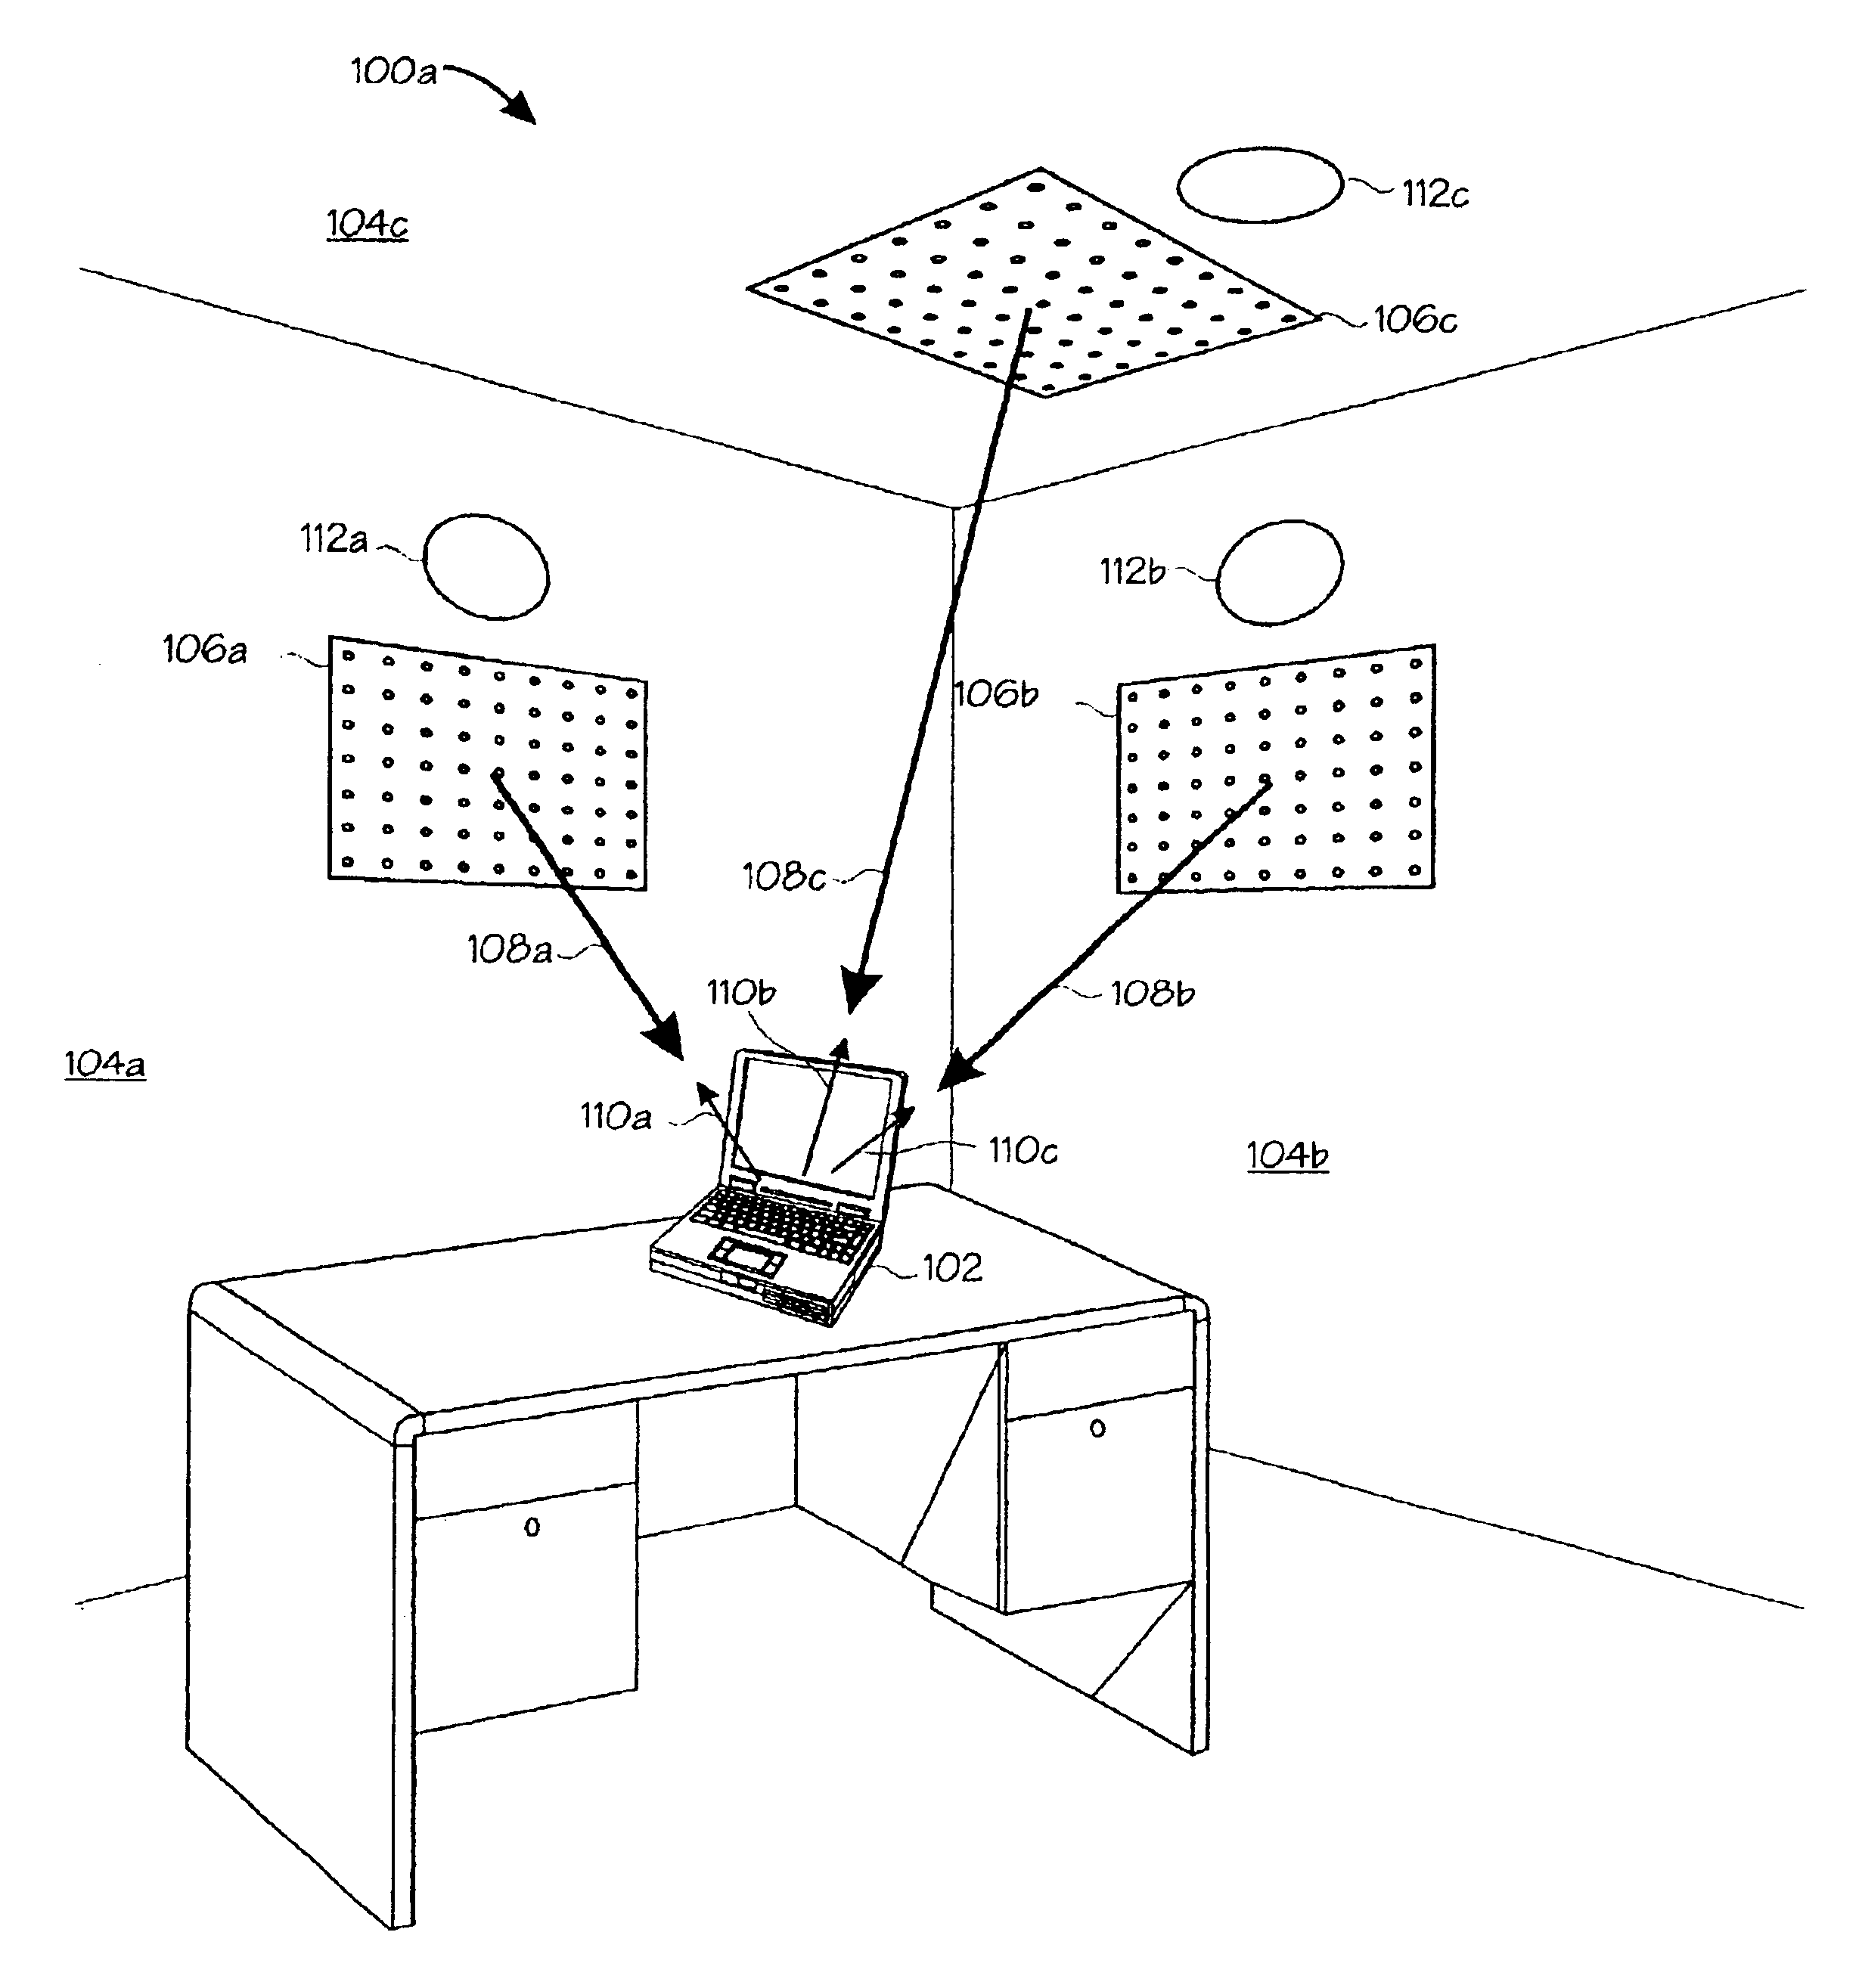 Charging of devices by microwave power beaming